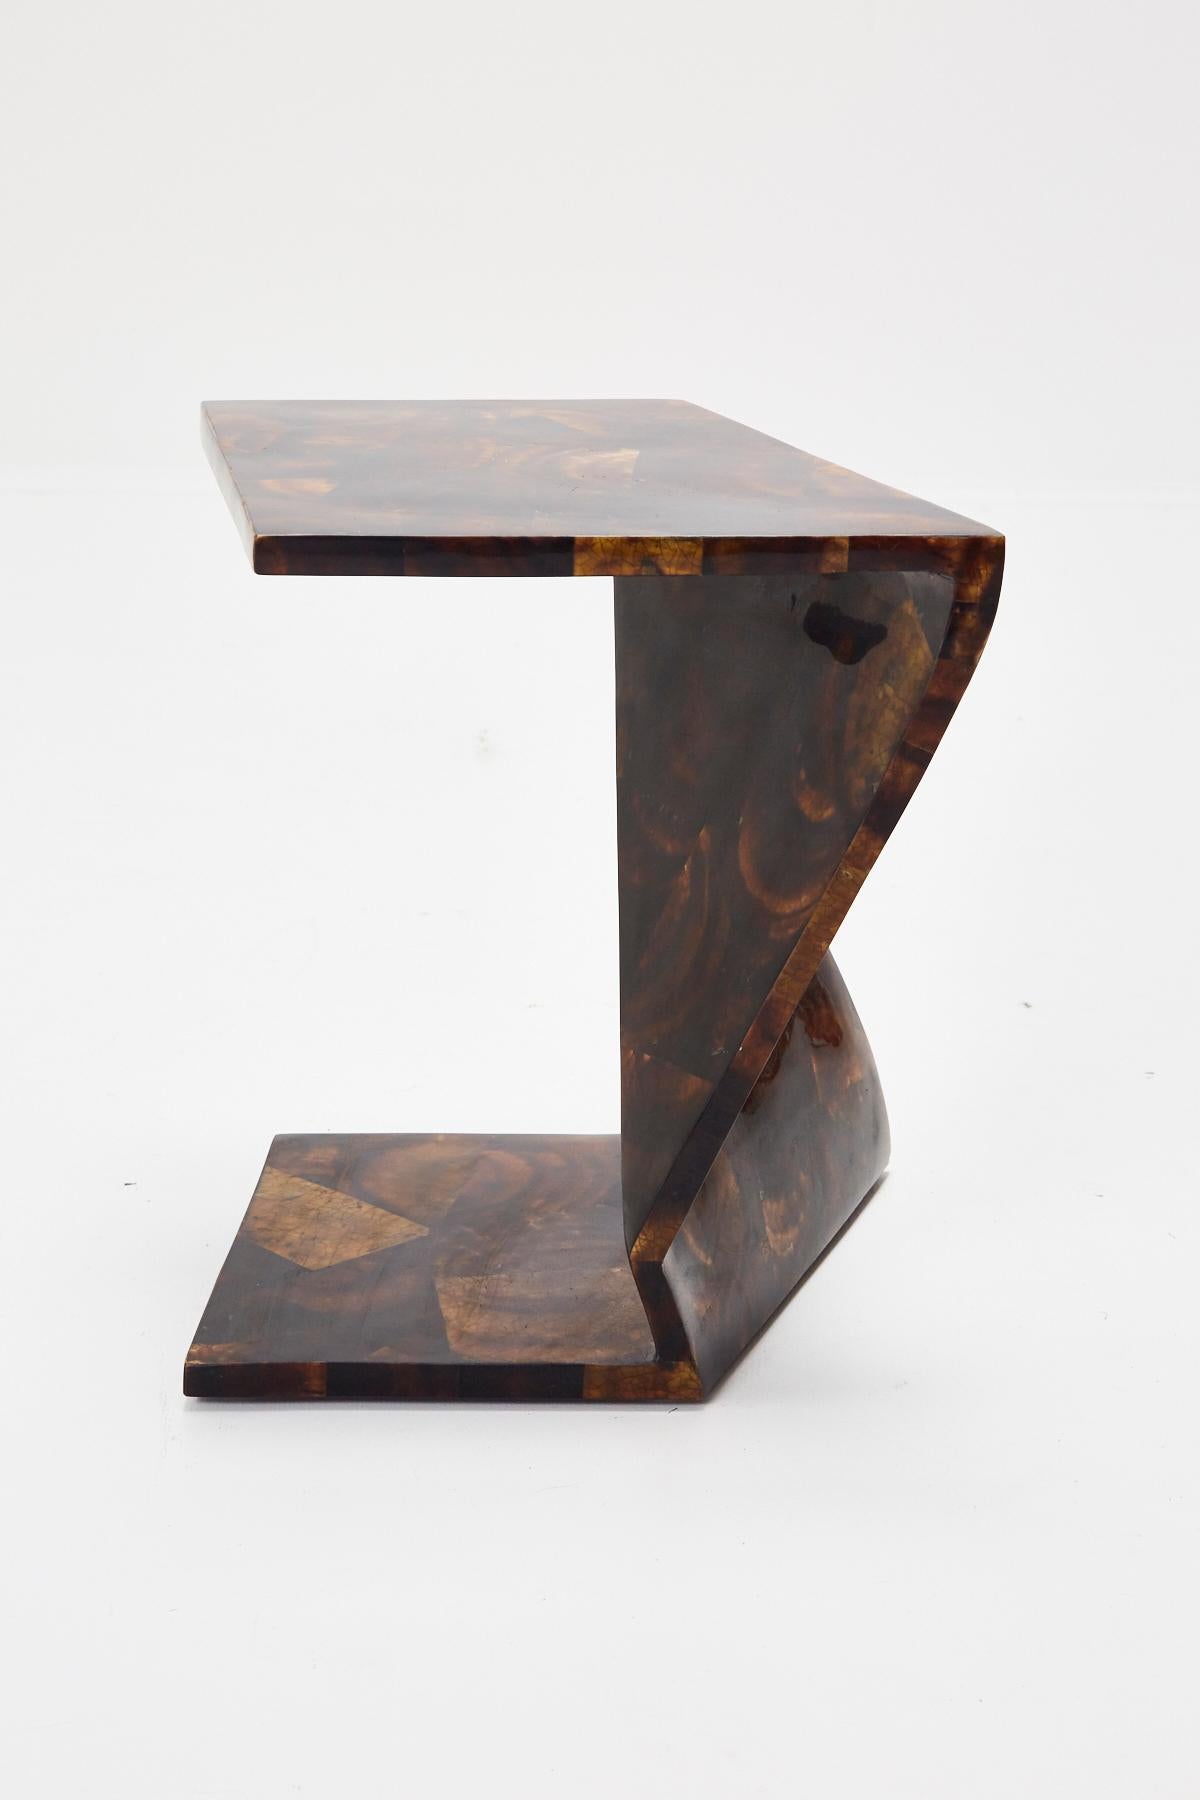 Set of two zig zag tables that can be used either as side tables or put together as a cocktail table. Tables are executed in wood, completely inlaid with young pen seashell (which resembles tortoise shell). 

Each table measures: 17 1/4 x 19 1/2 x